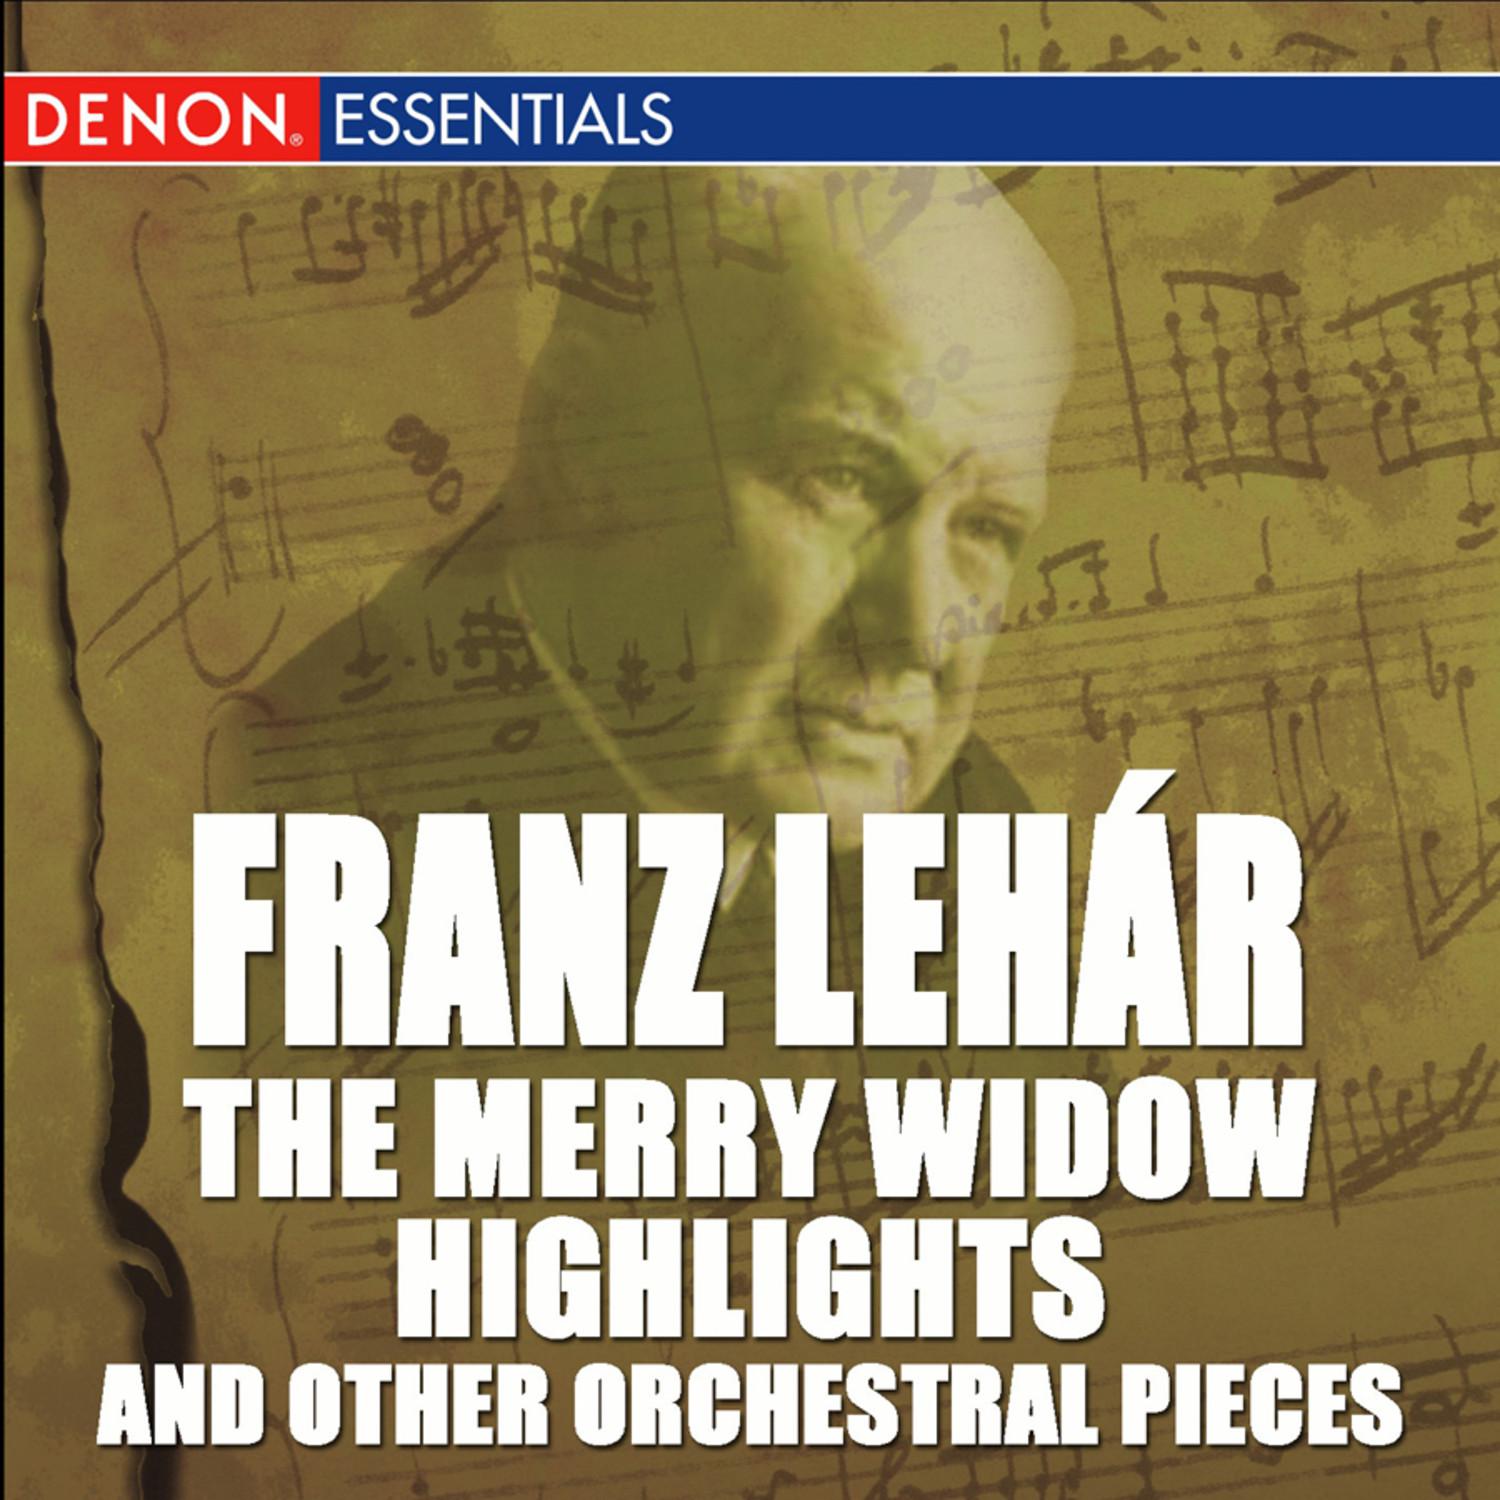 Leha r: The Merry Widow Highlights and Other Orchestral Pieces